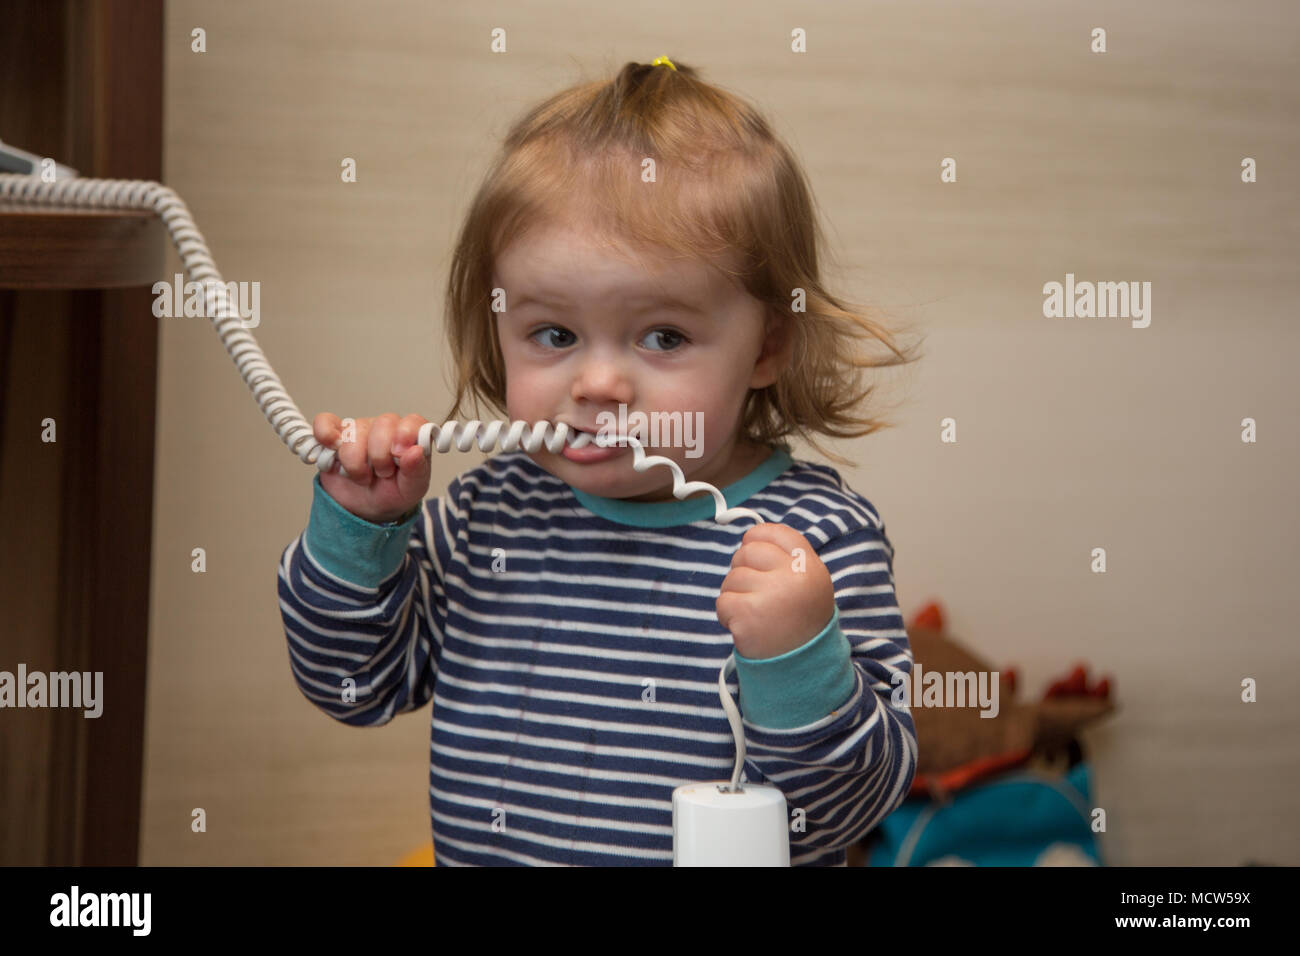 18 month old toddler girl playing with a house phone, UK Stock Photo